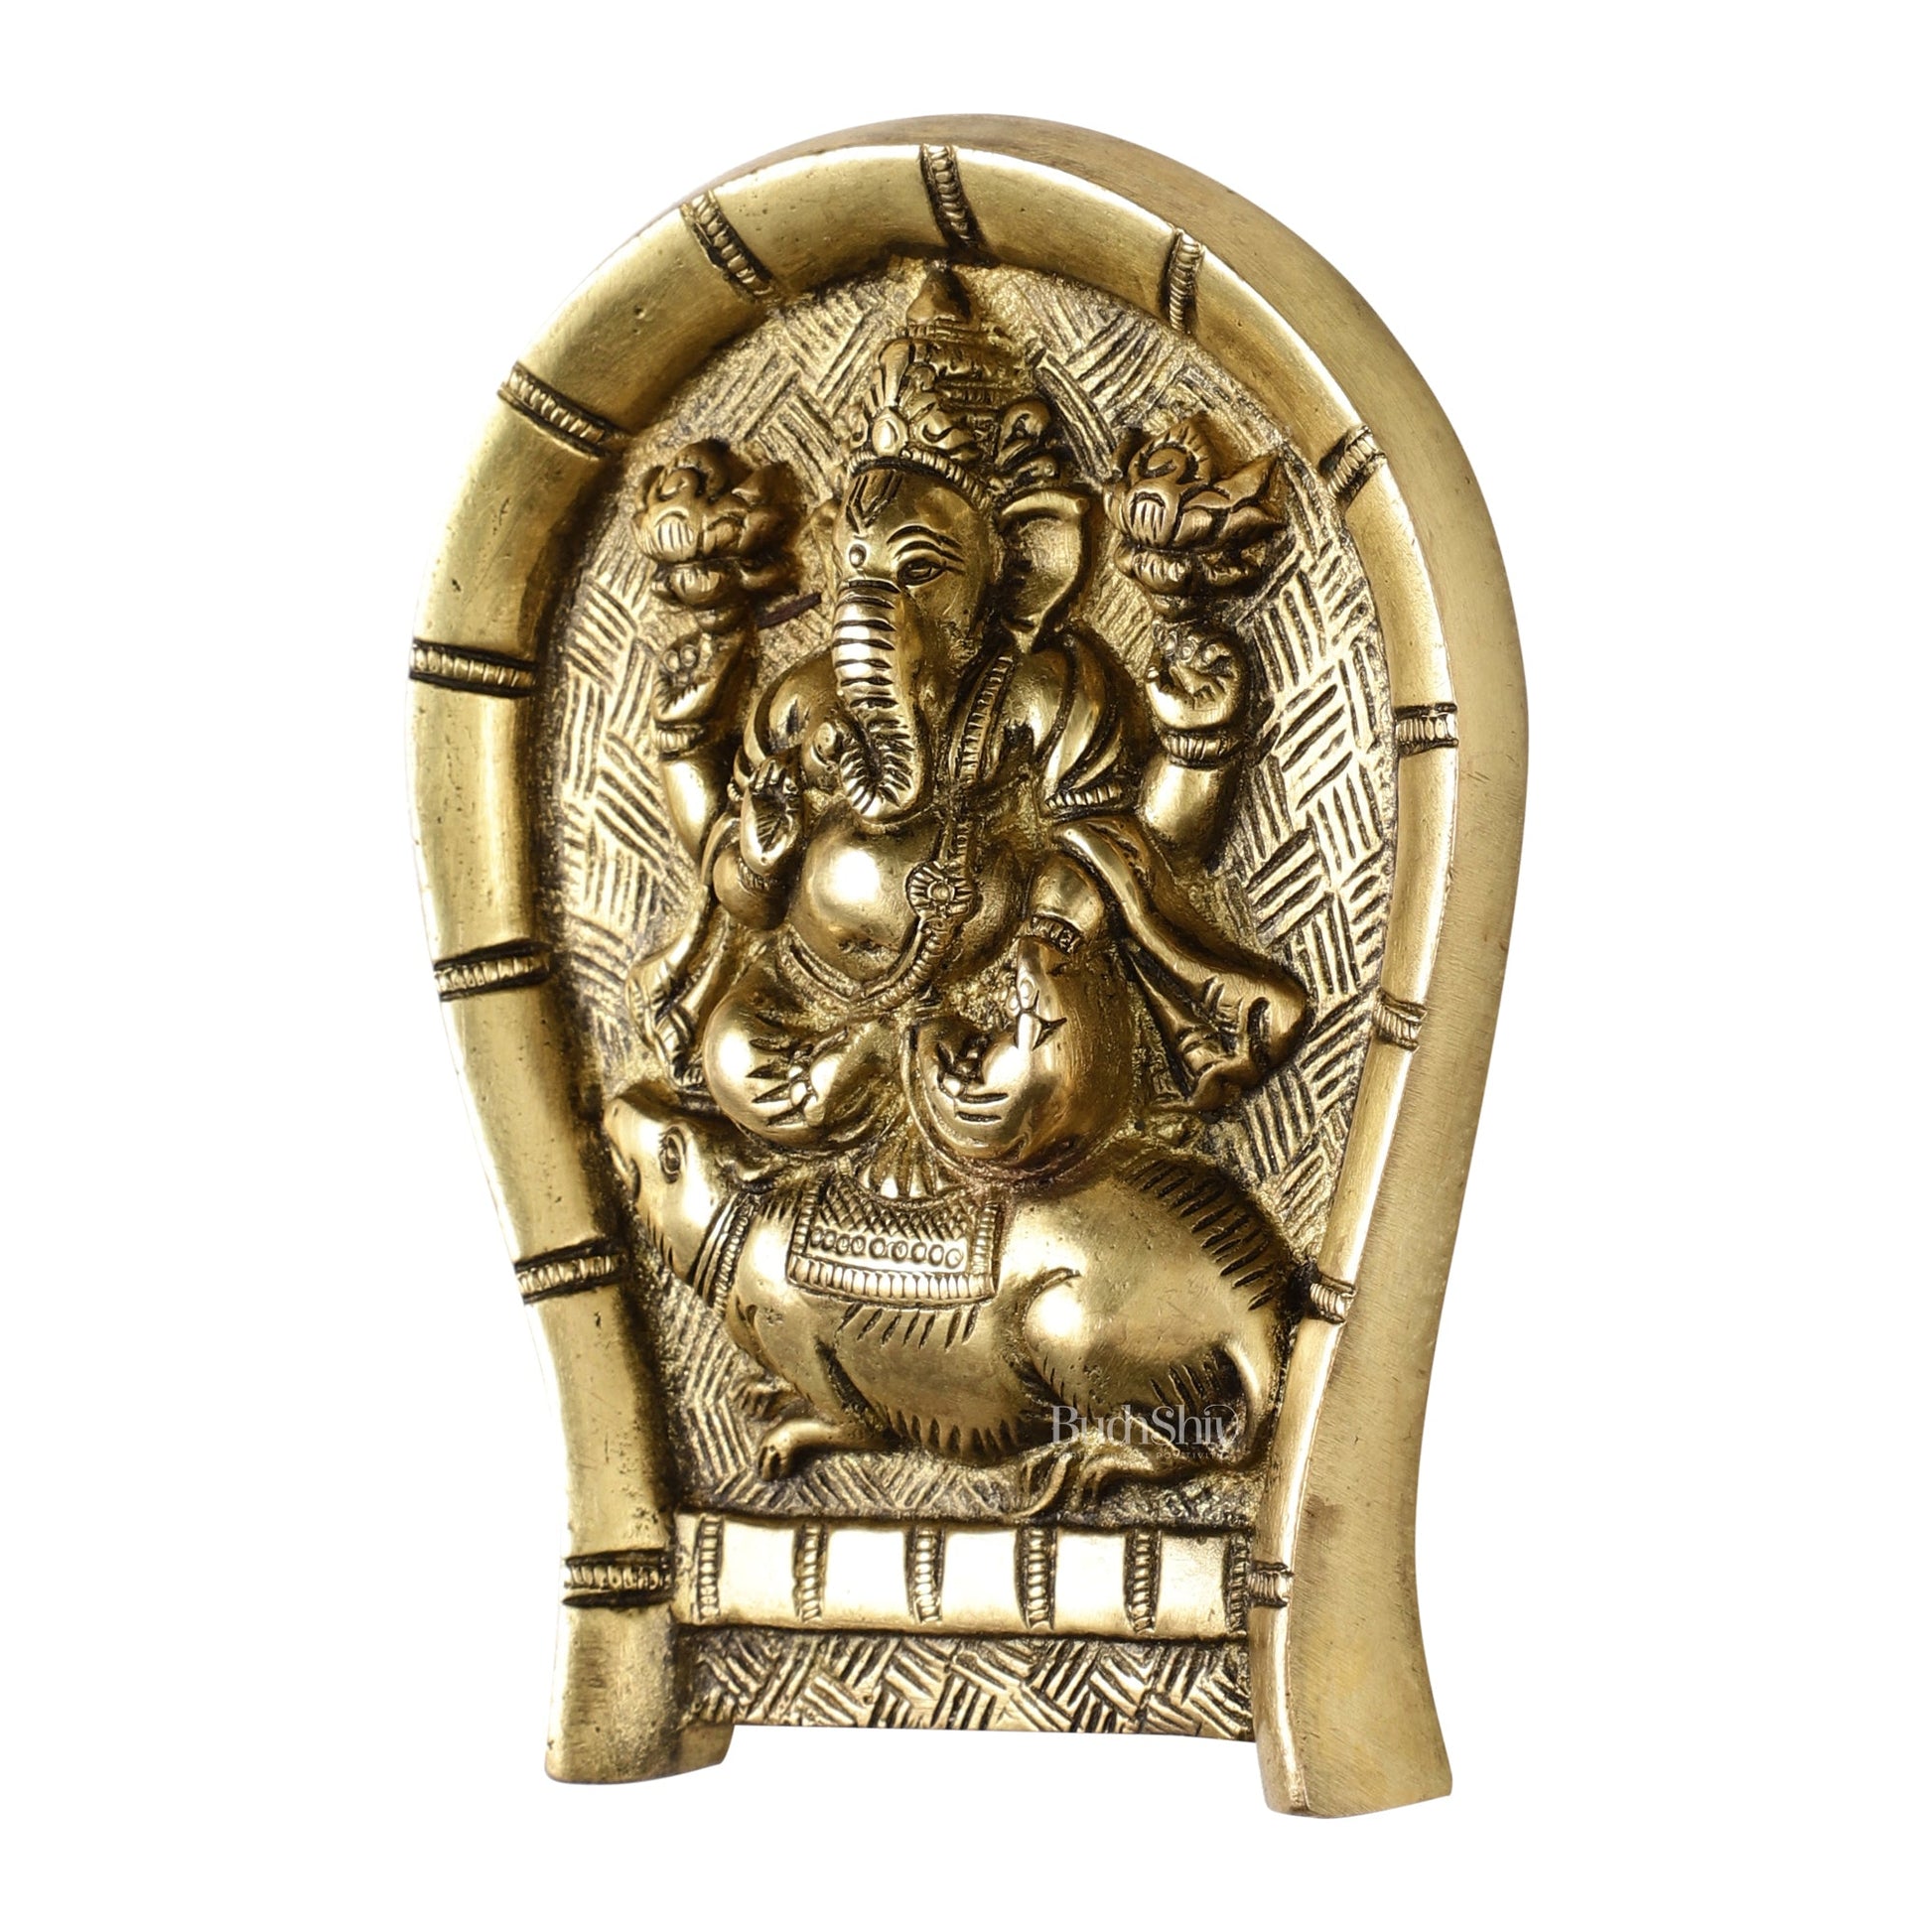 Superfine Brass Lord Ganesha Seated on a Mouse Wall Hanging - 6x5 Inch - Budhshiv.com